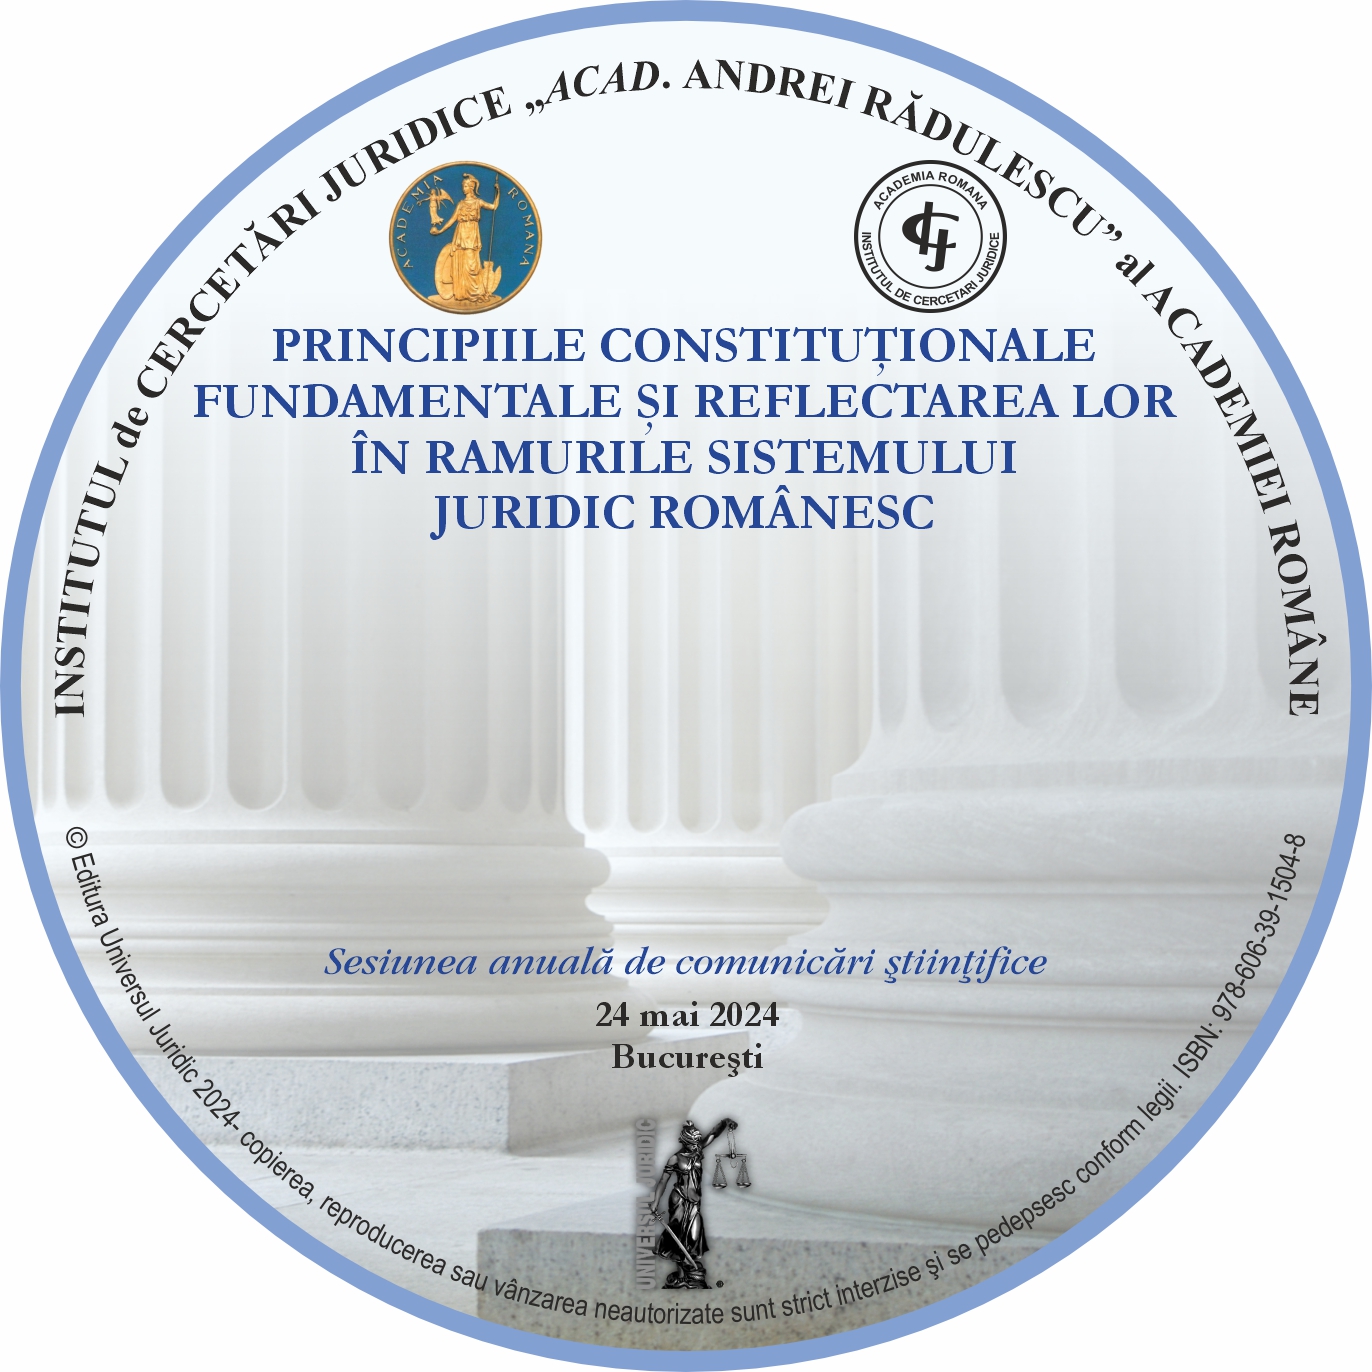 Reflecting The Fundamental Constitutional Principles in Labor Law Cover Image